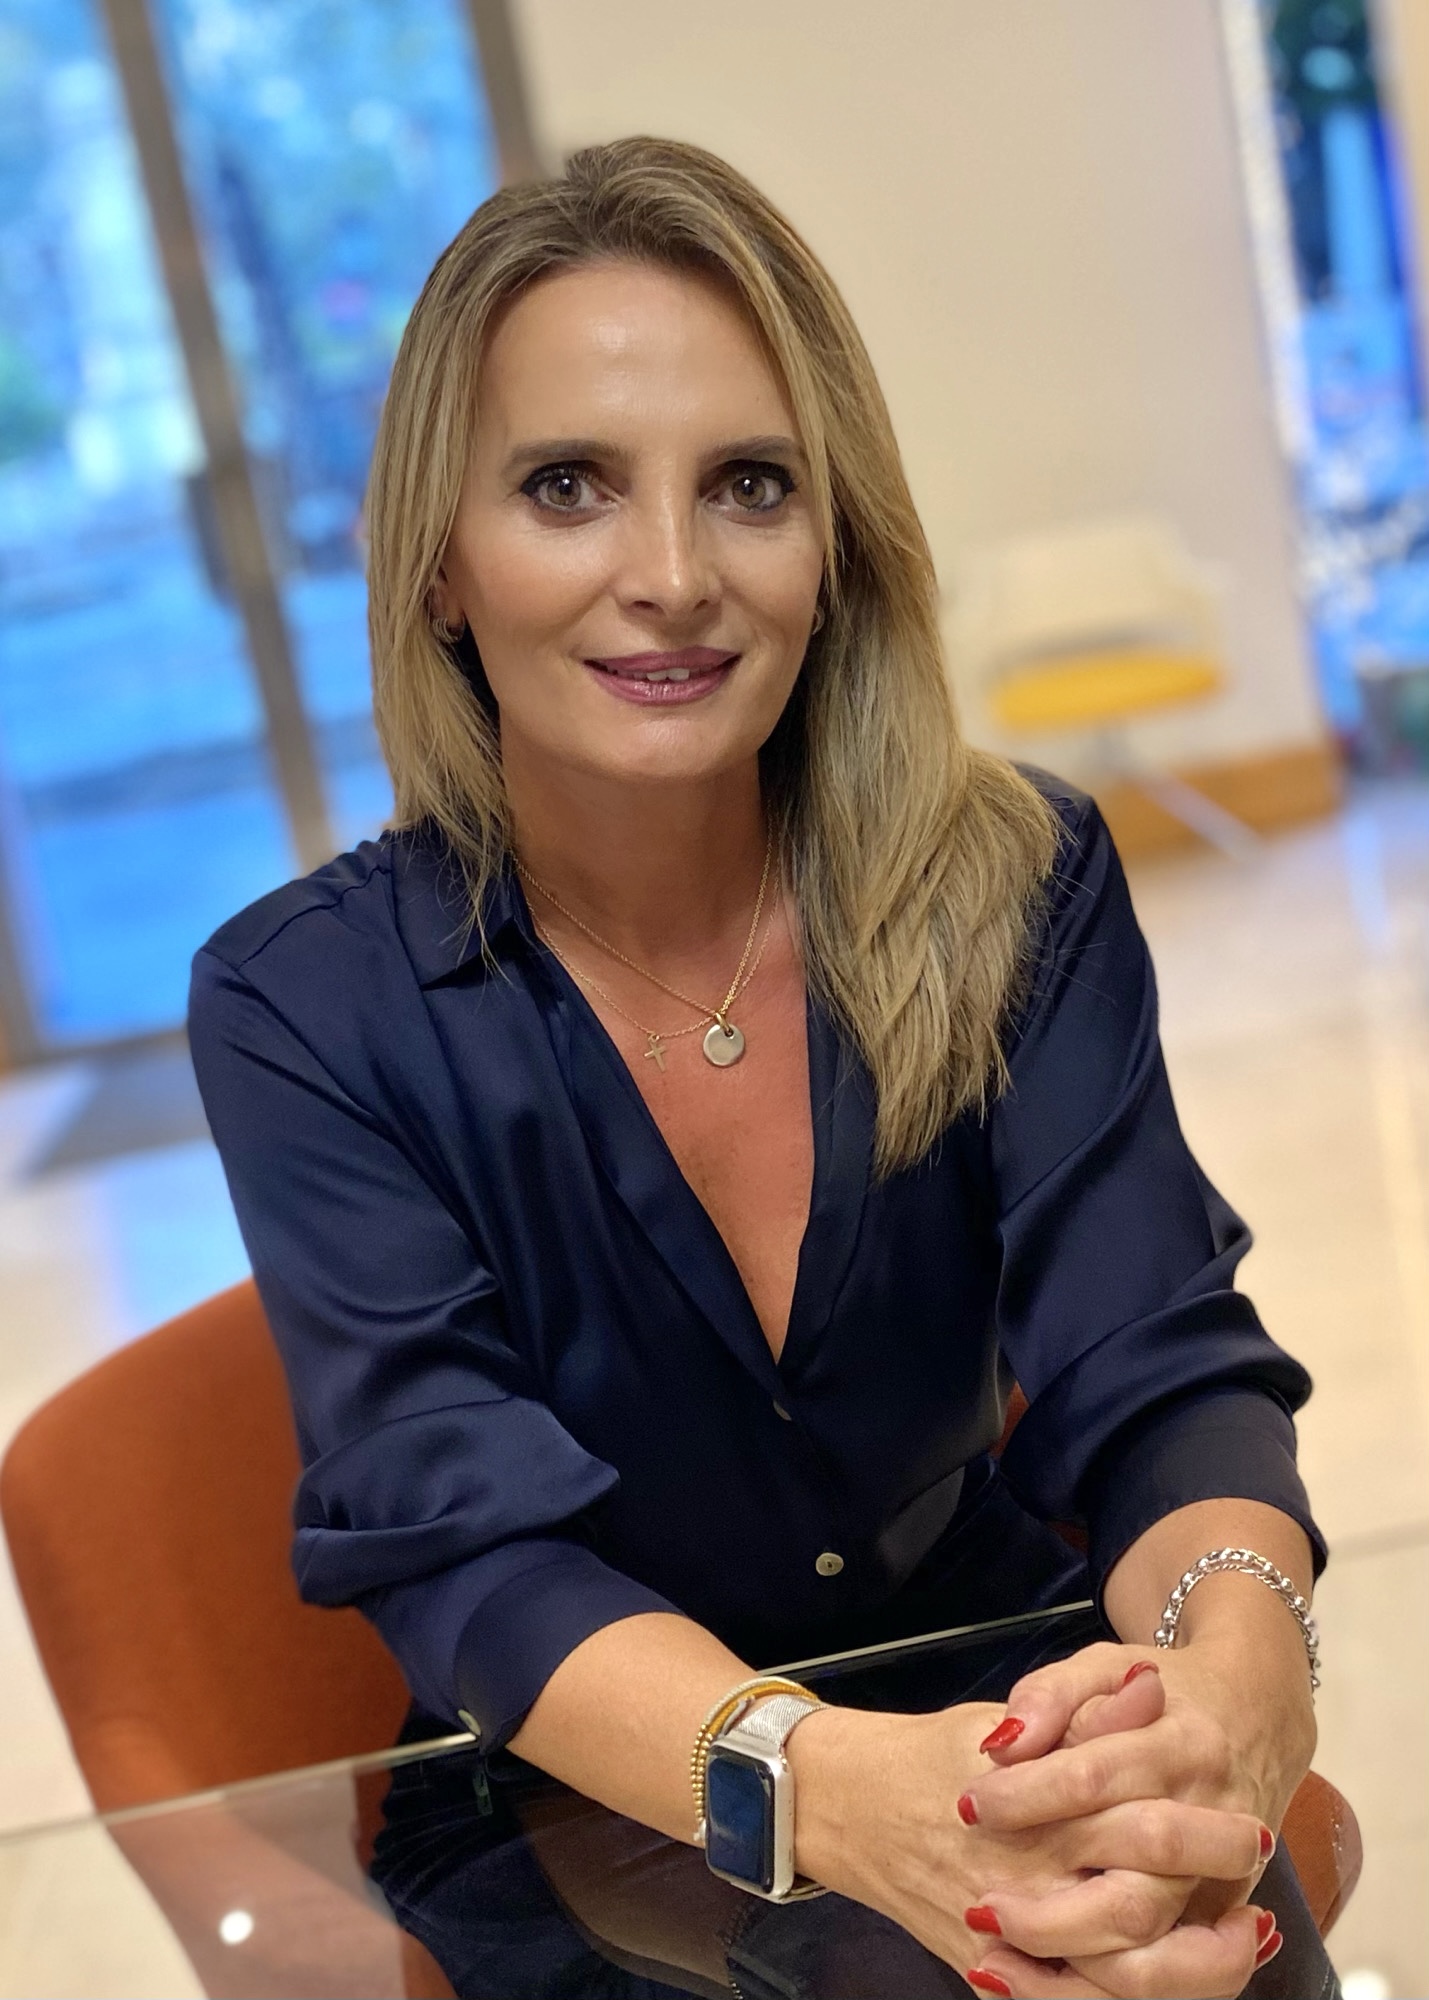 Inmaculada Payá, Real-Estate Consultant Seville Sotheby's International Realty